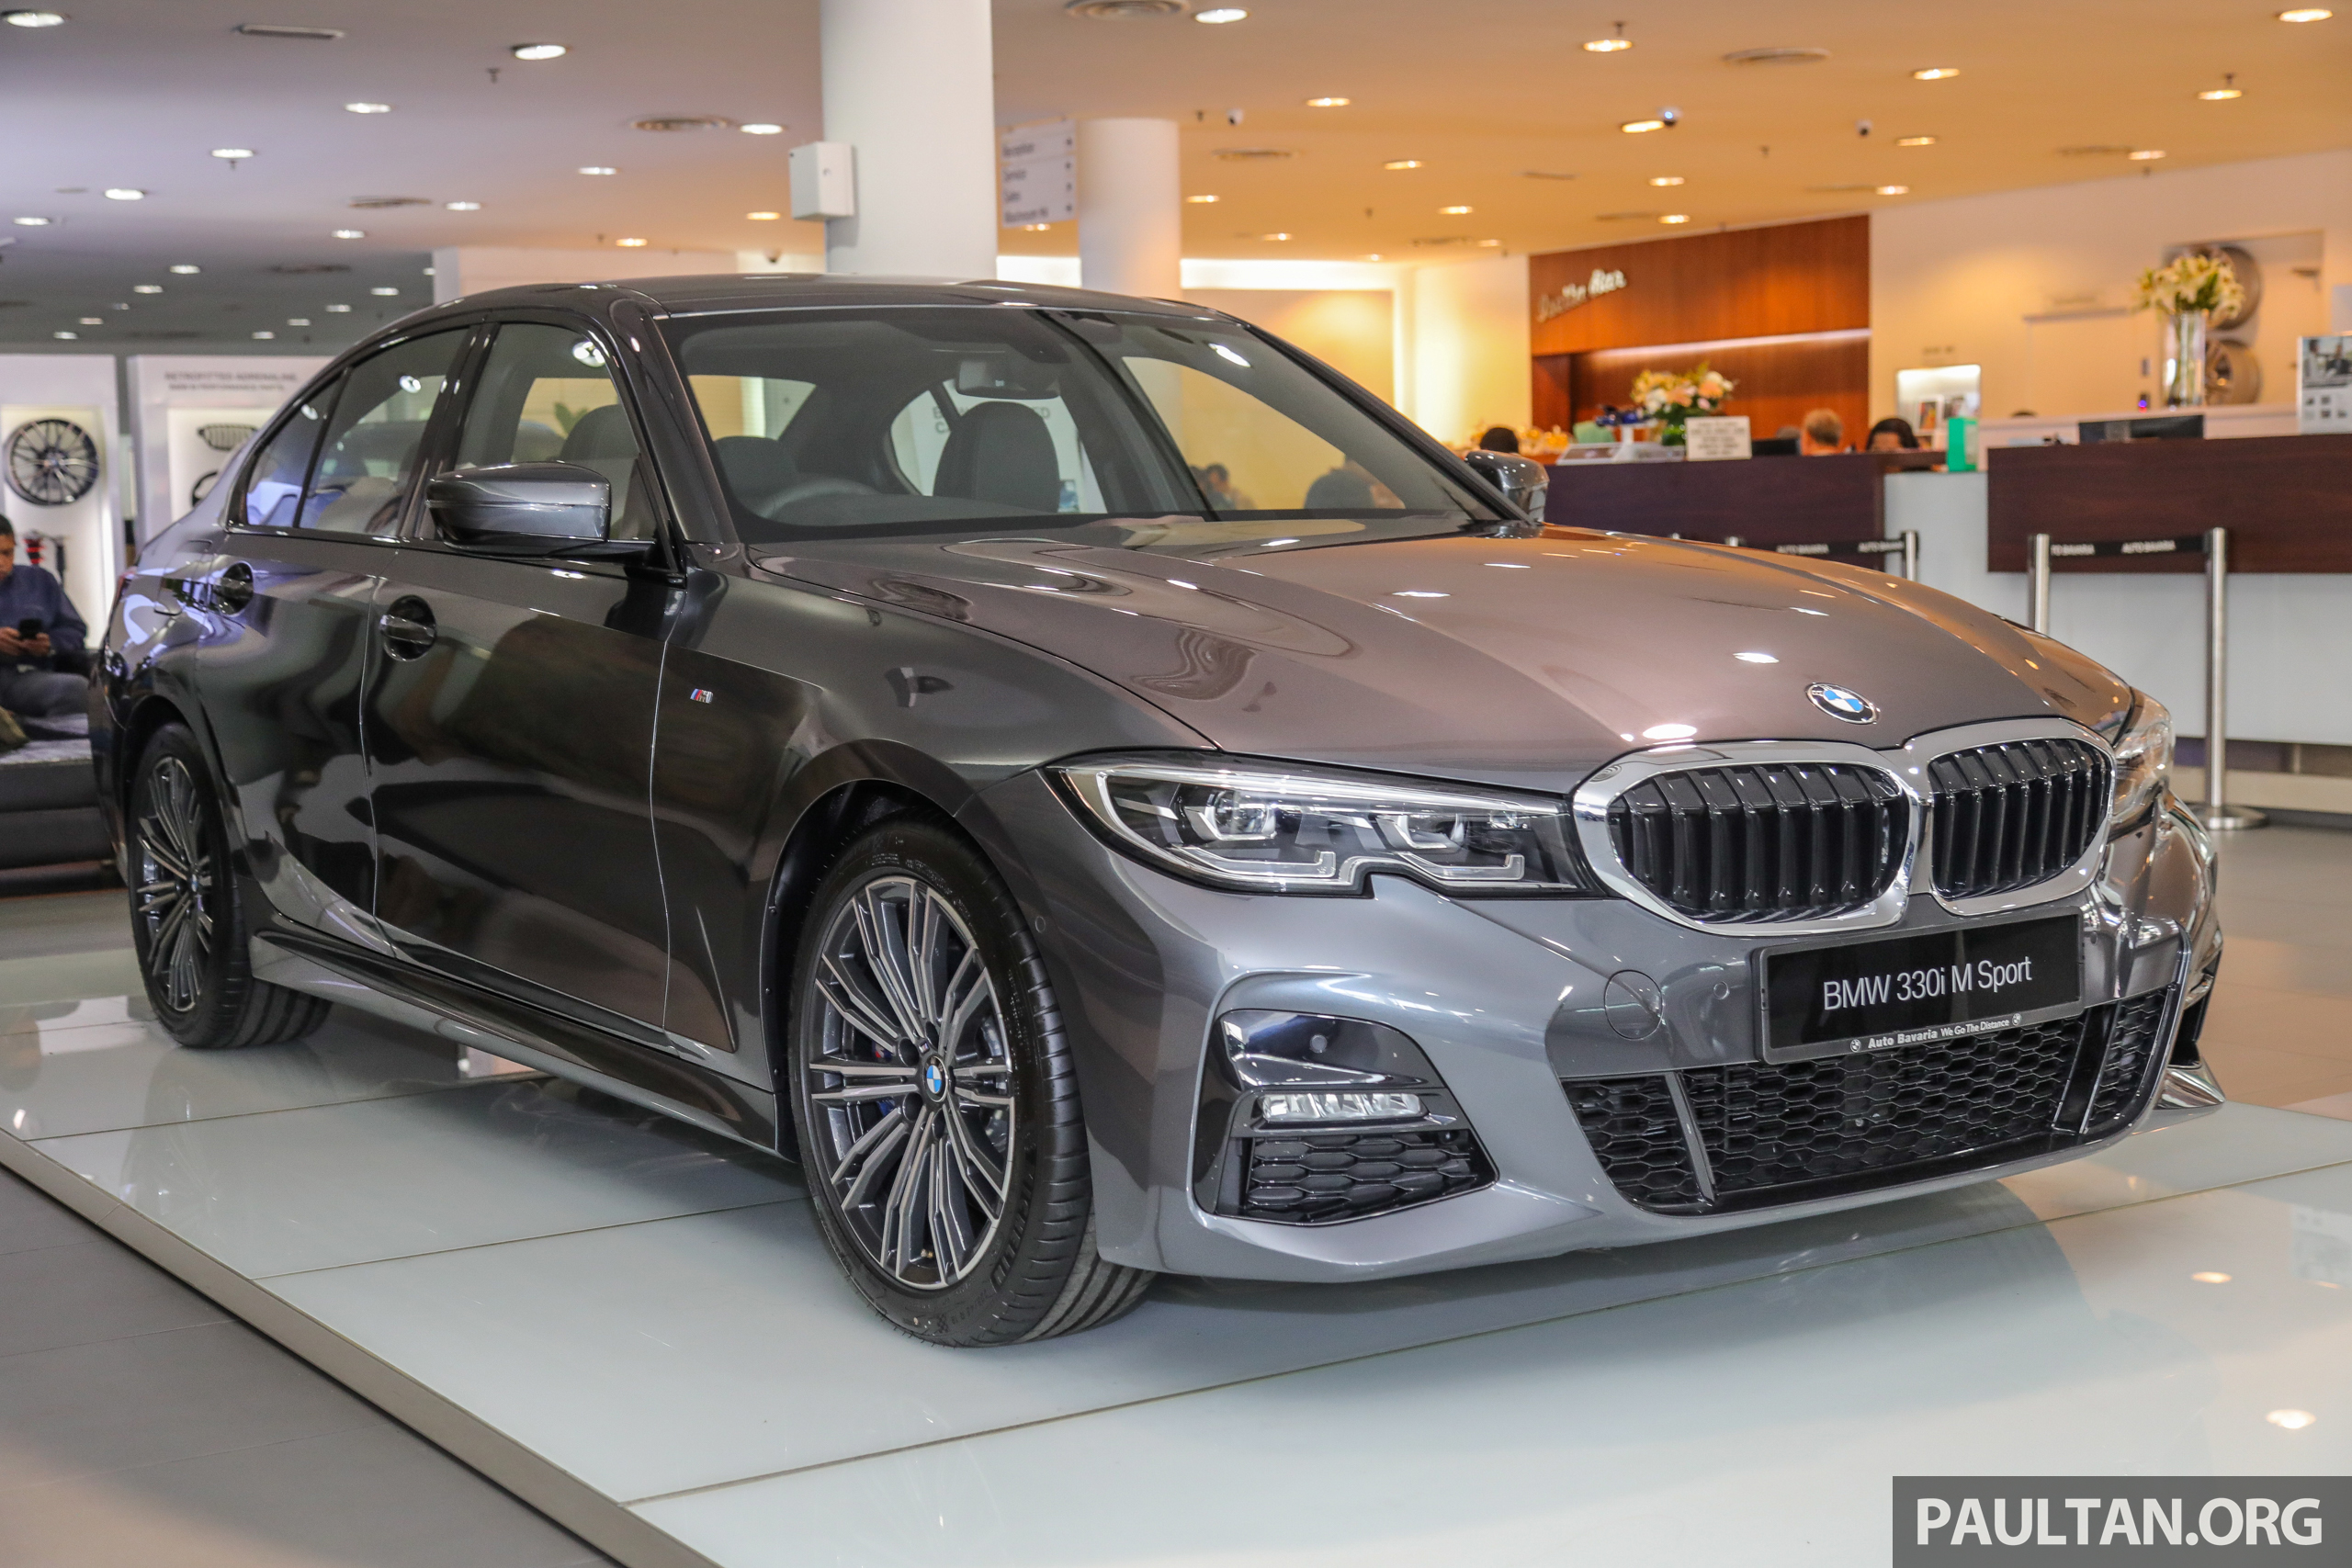 G20 Bmw 330i M Sport And 320i Sport Prices Increased To Rm294k And Rm249k 330i Now Comes With Aeb Paultan Org